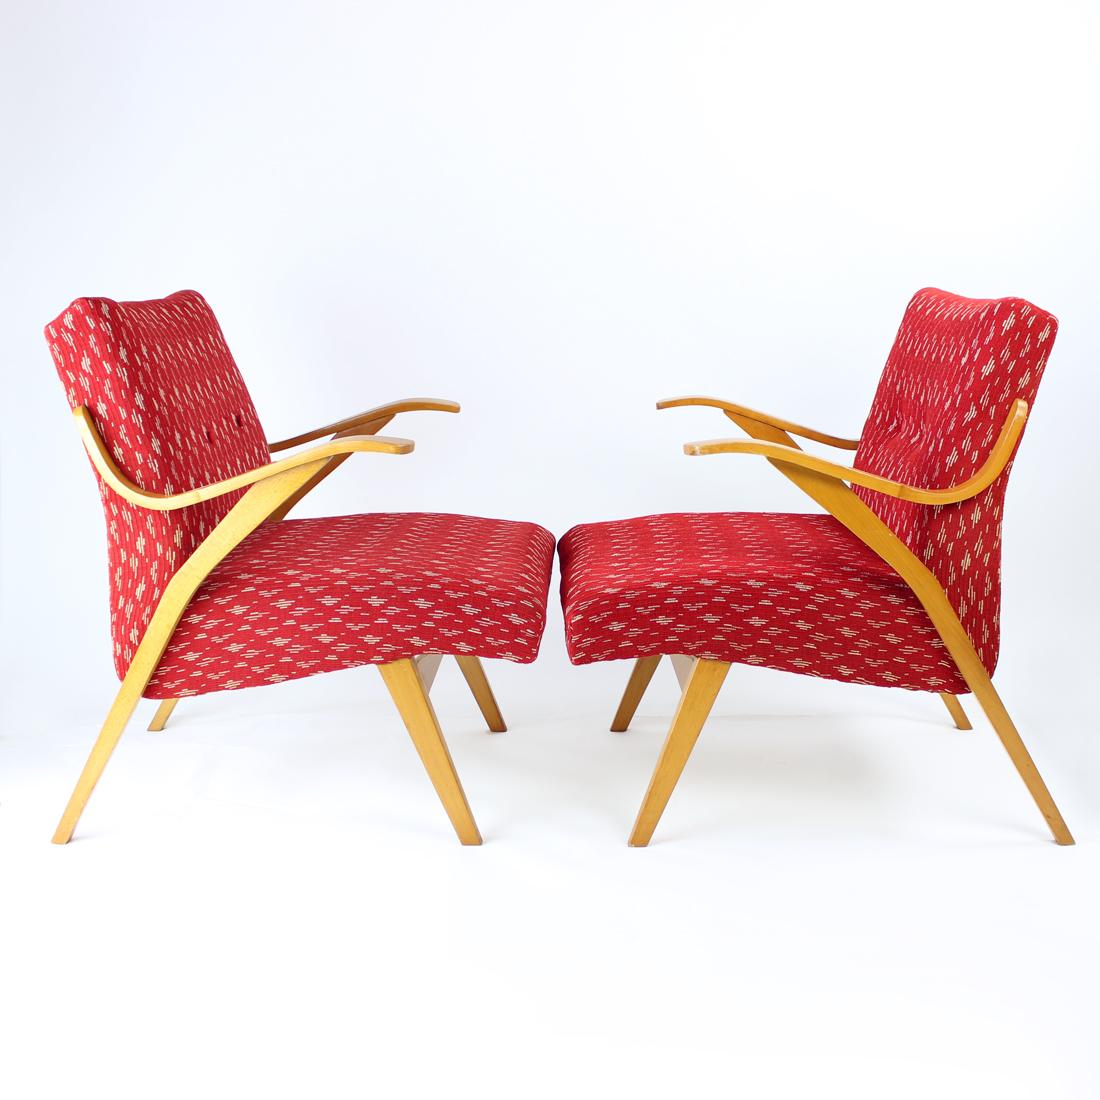 Midcentury Armchair in Original Red Fabric & Blonde Wood, Czechoslovakia, 1960s For Sale 7